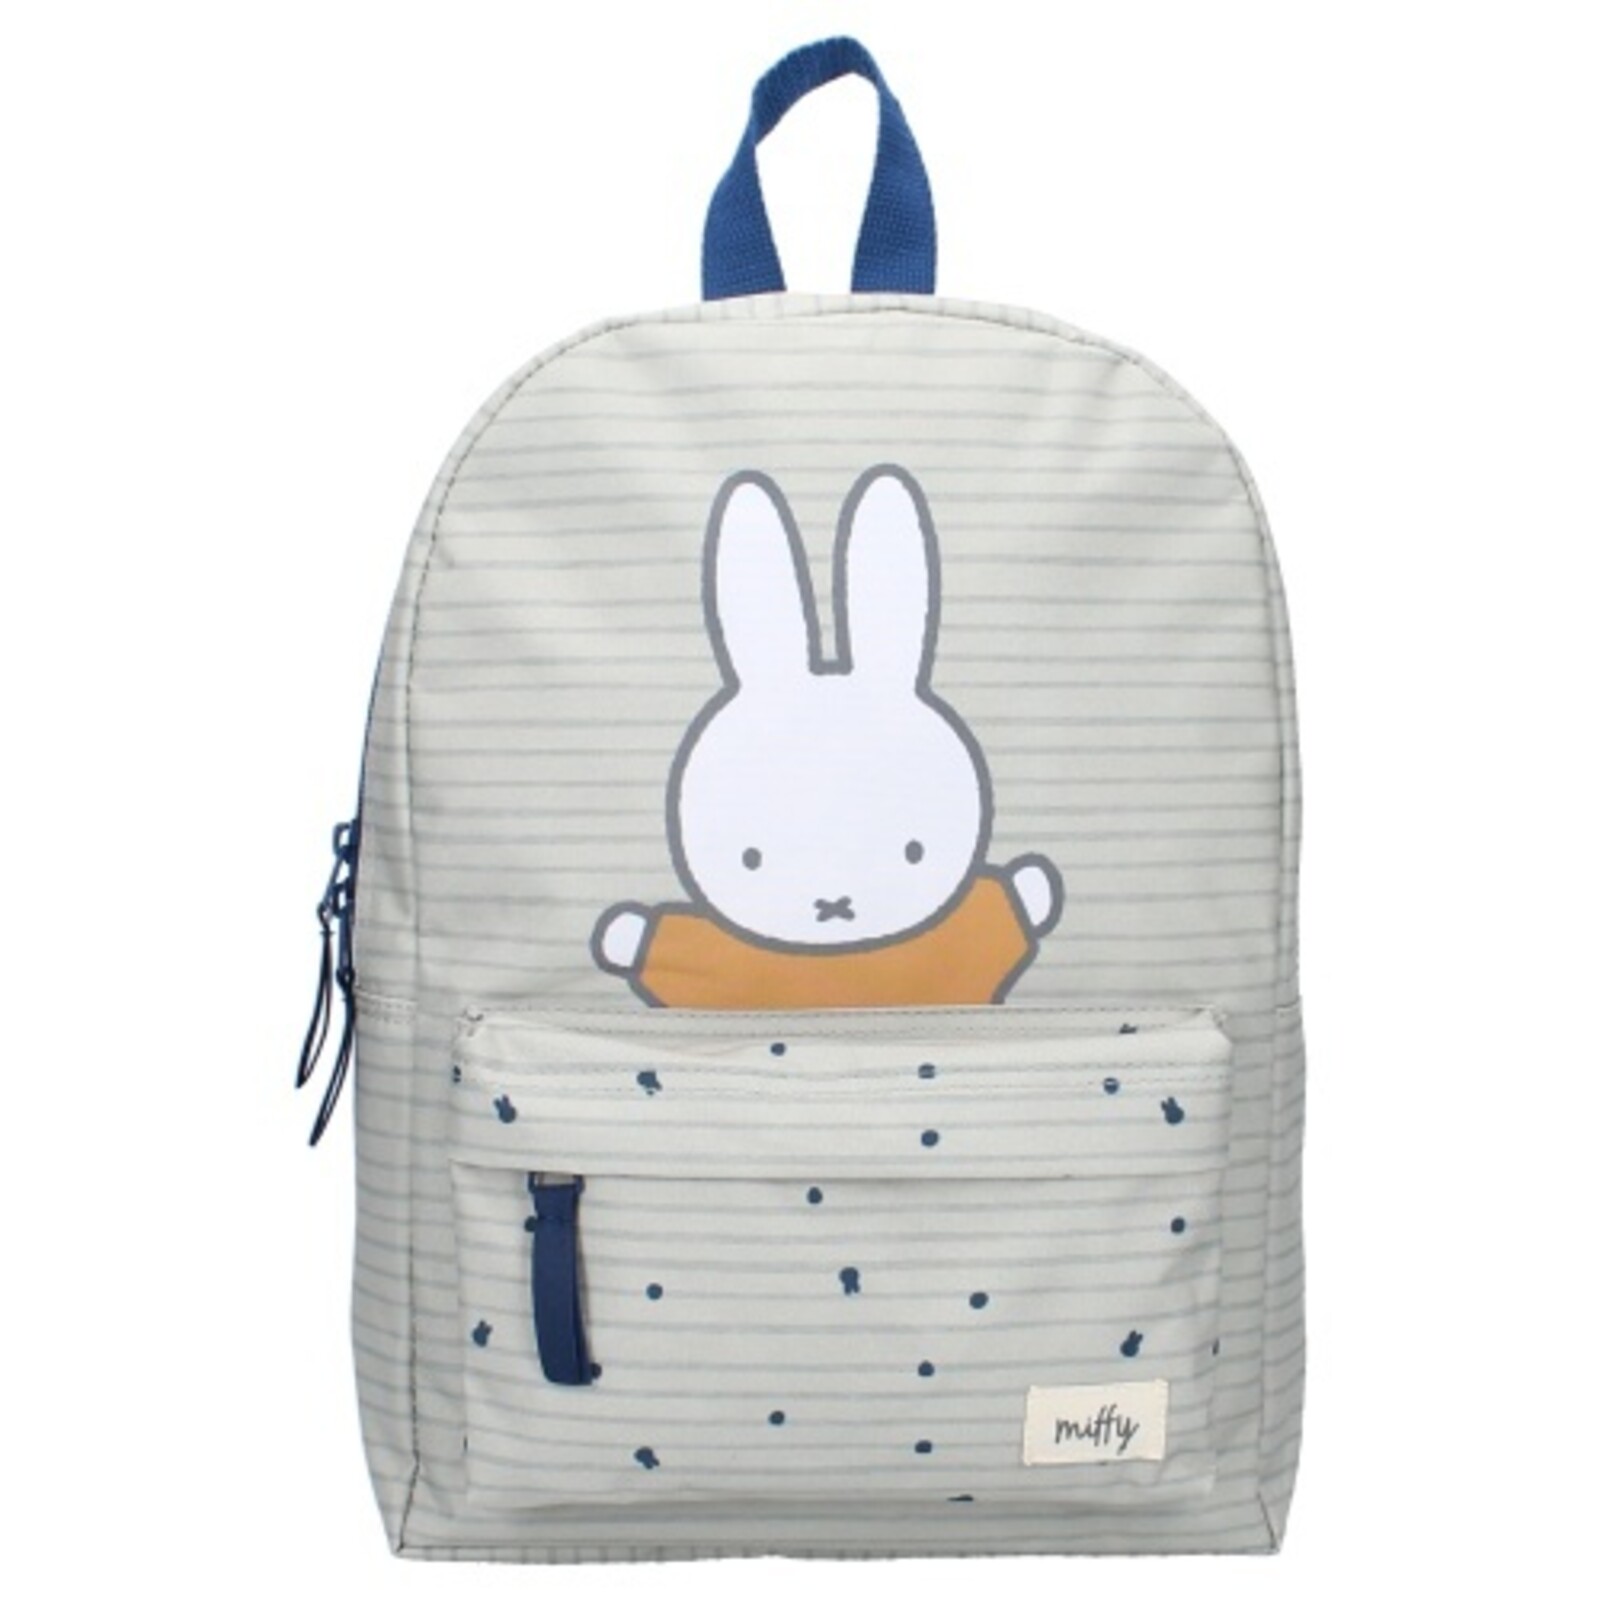 Backpack miffy reach for the stars grijs